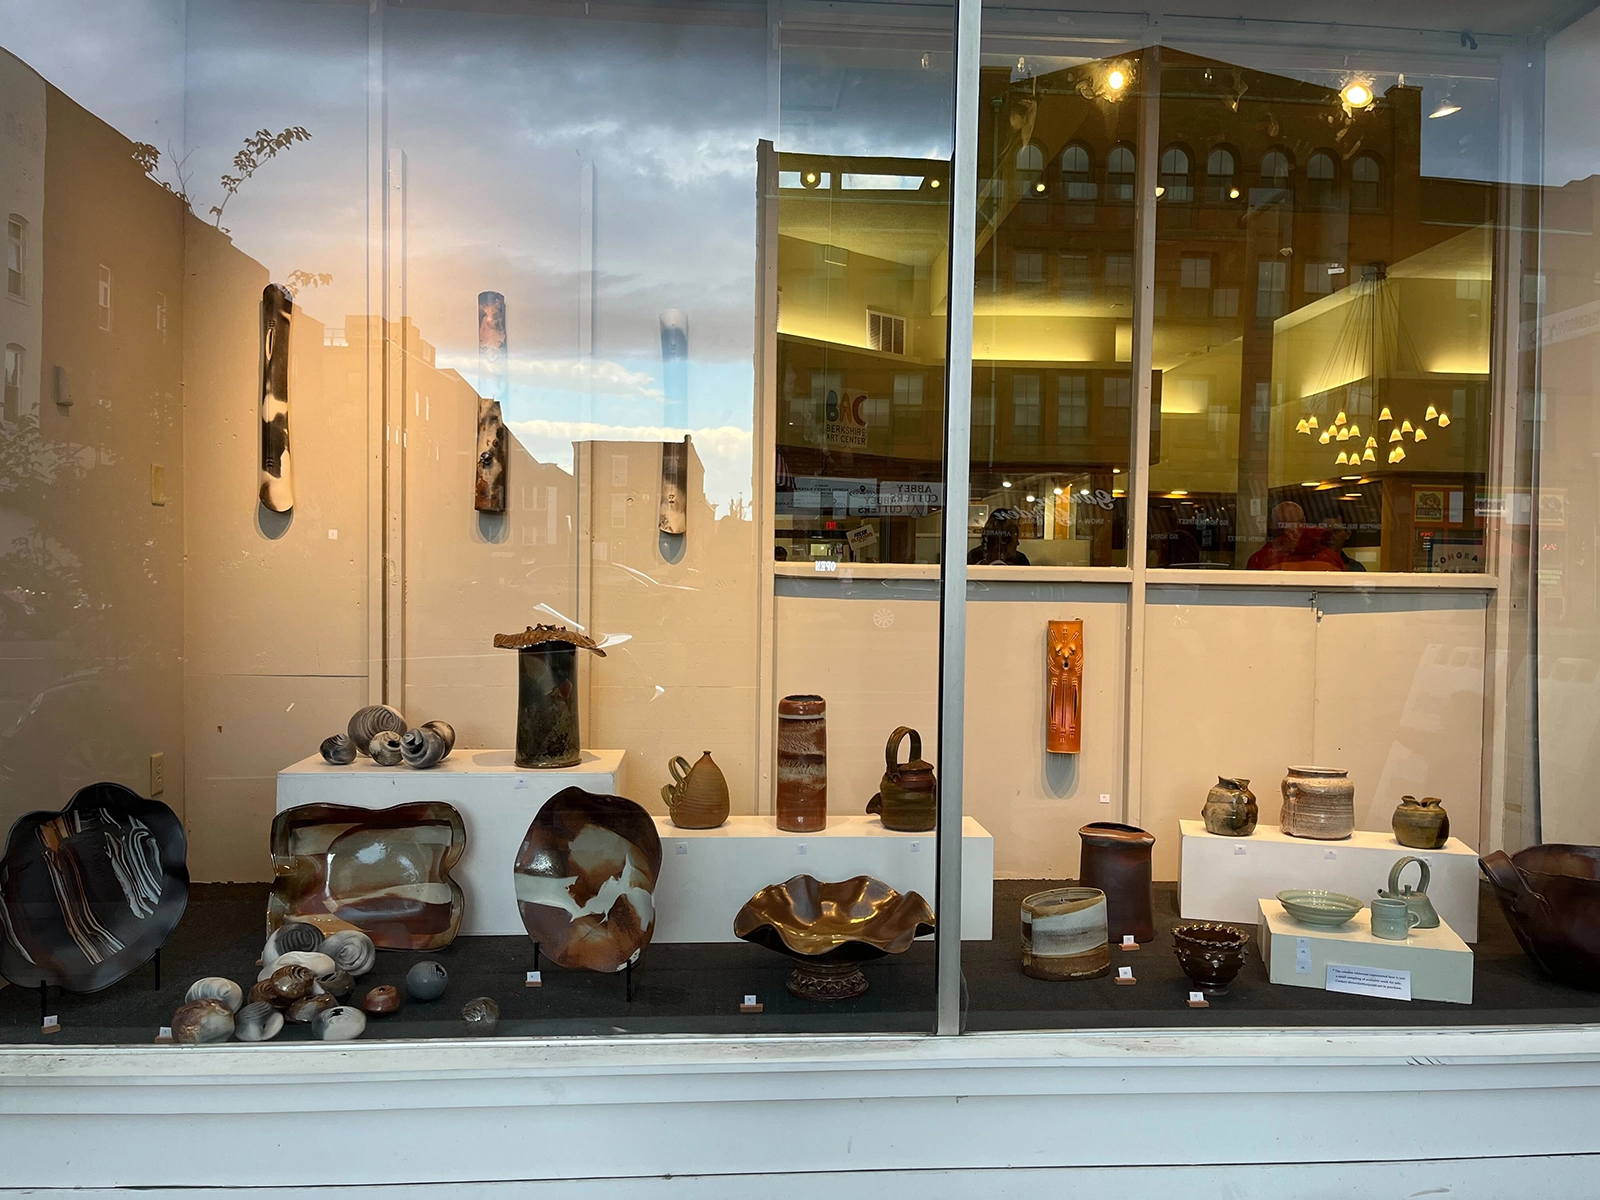 A window display of a pottery gallery showcasing various ceramic pieces. The display includes a variety of vases, bowls, and decorative objects arranged on white pedestals and shelves. The pottery features different shapes, sizes, and earth-toned glazes. Reflections of buildings and the sky can be seen on the window glass, adding depth to the scene. Inside the gallery, warm lighting illuminates the artworks, creating an inviting atmosphere.